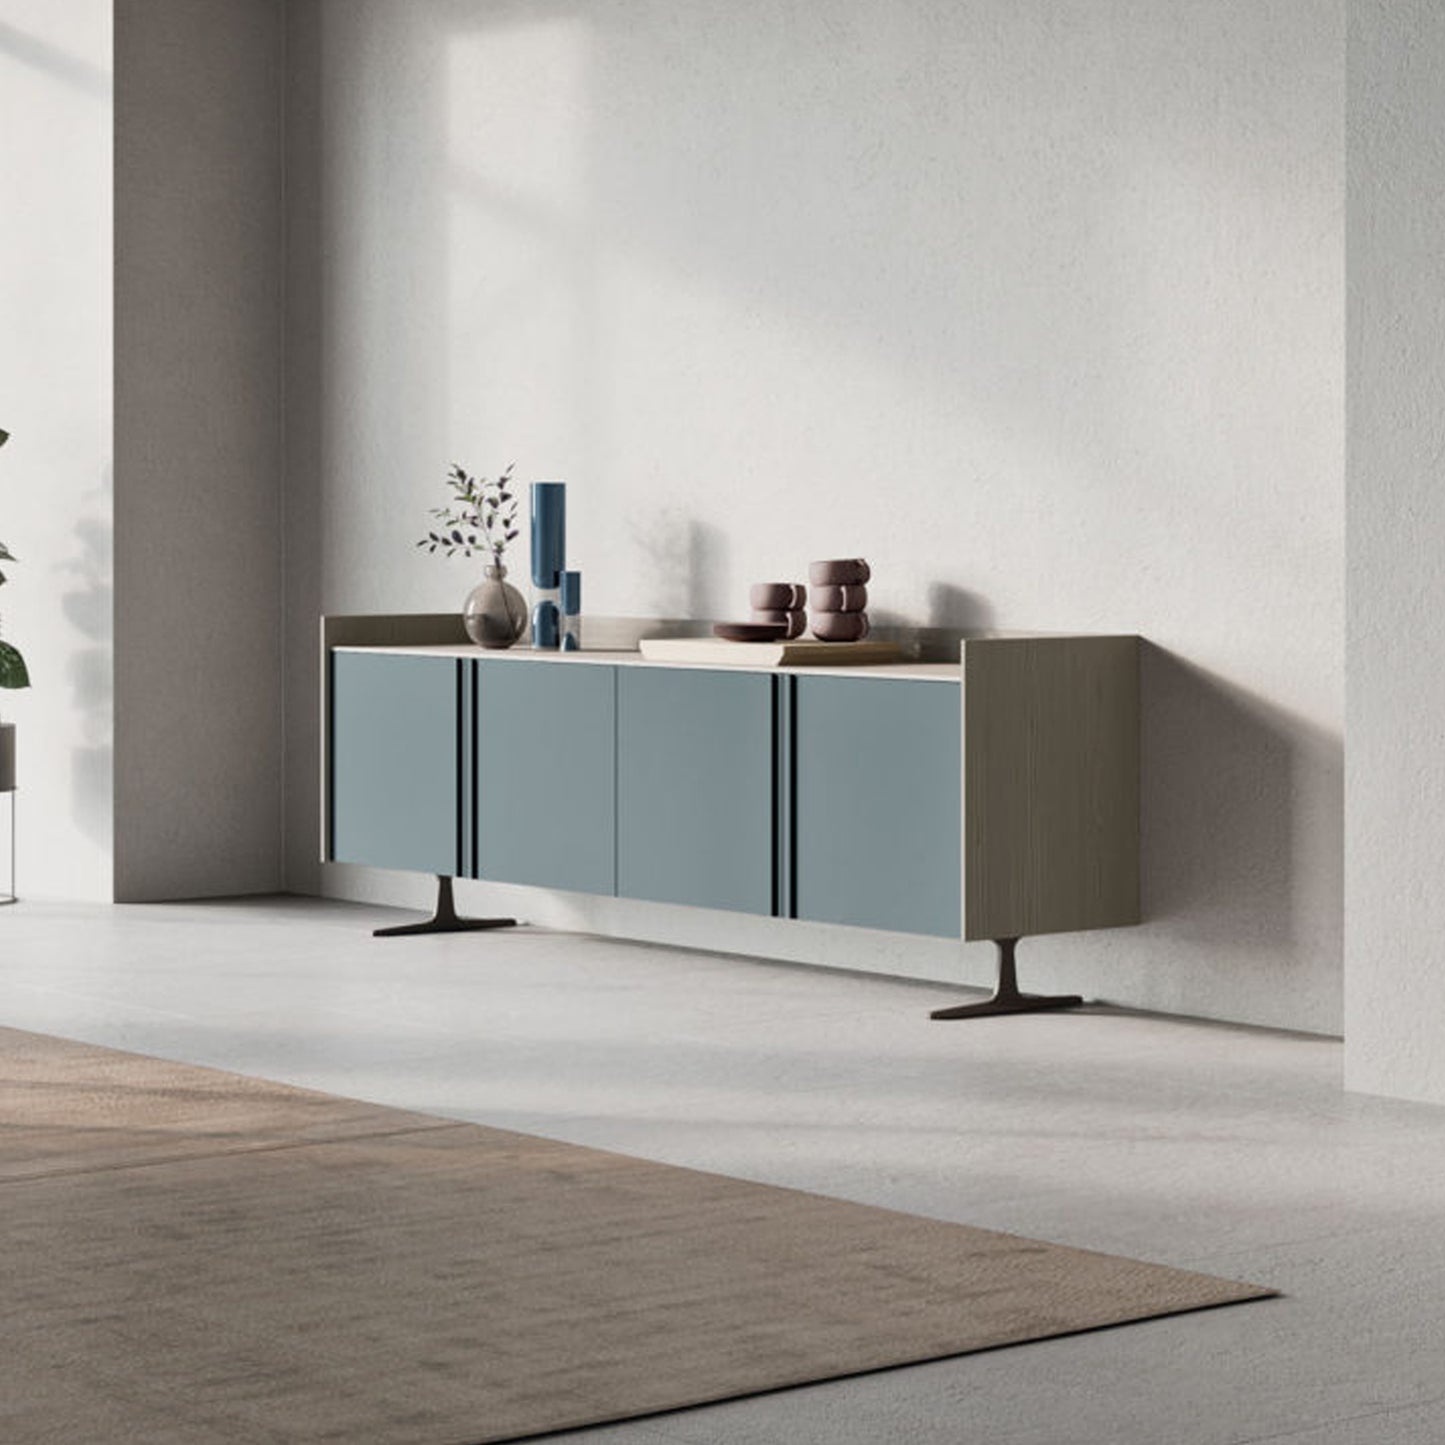 Tray 02 Sideboard by Orme Design